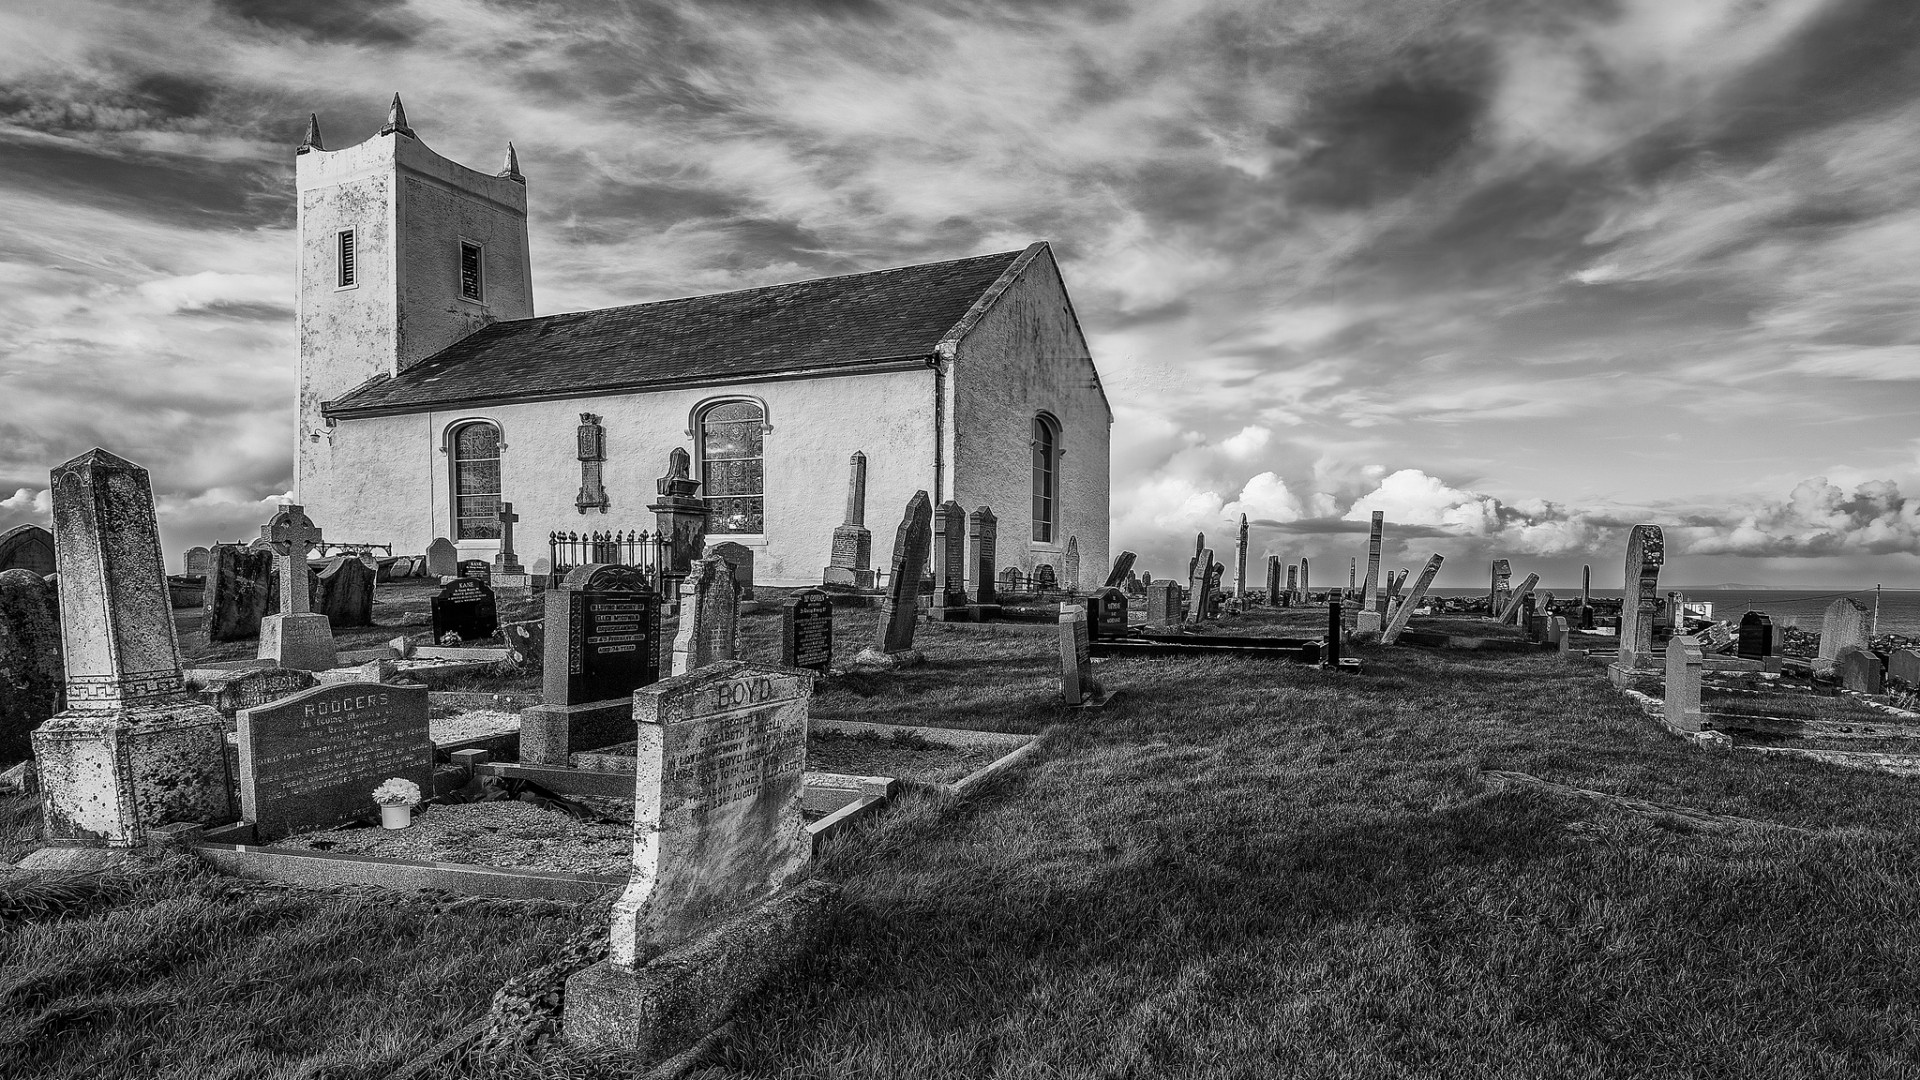 architecture, Monochrome, Grass, Clouds, Church, Cemetery, Grave, England, UK, Cross, HDR, Old Wallpaper